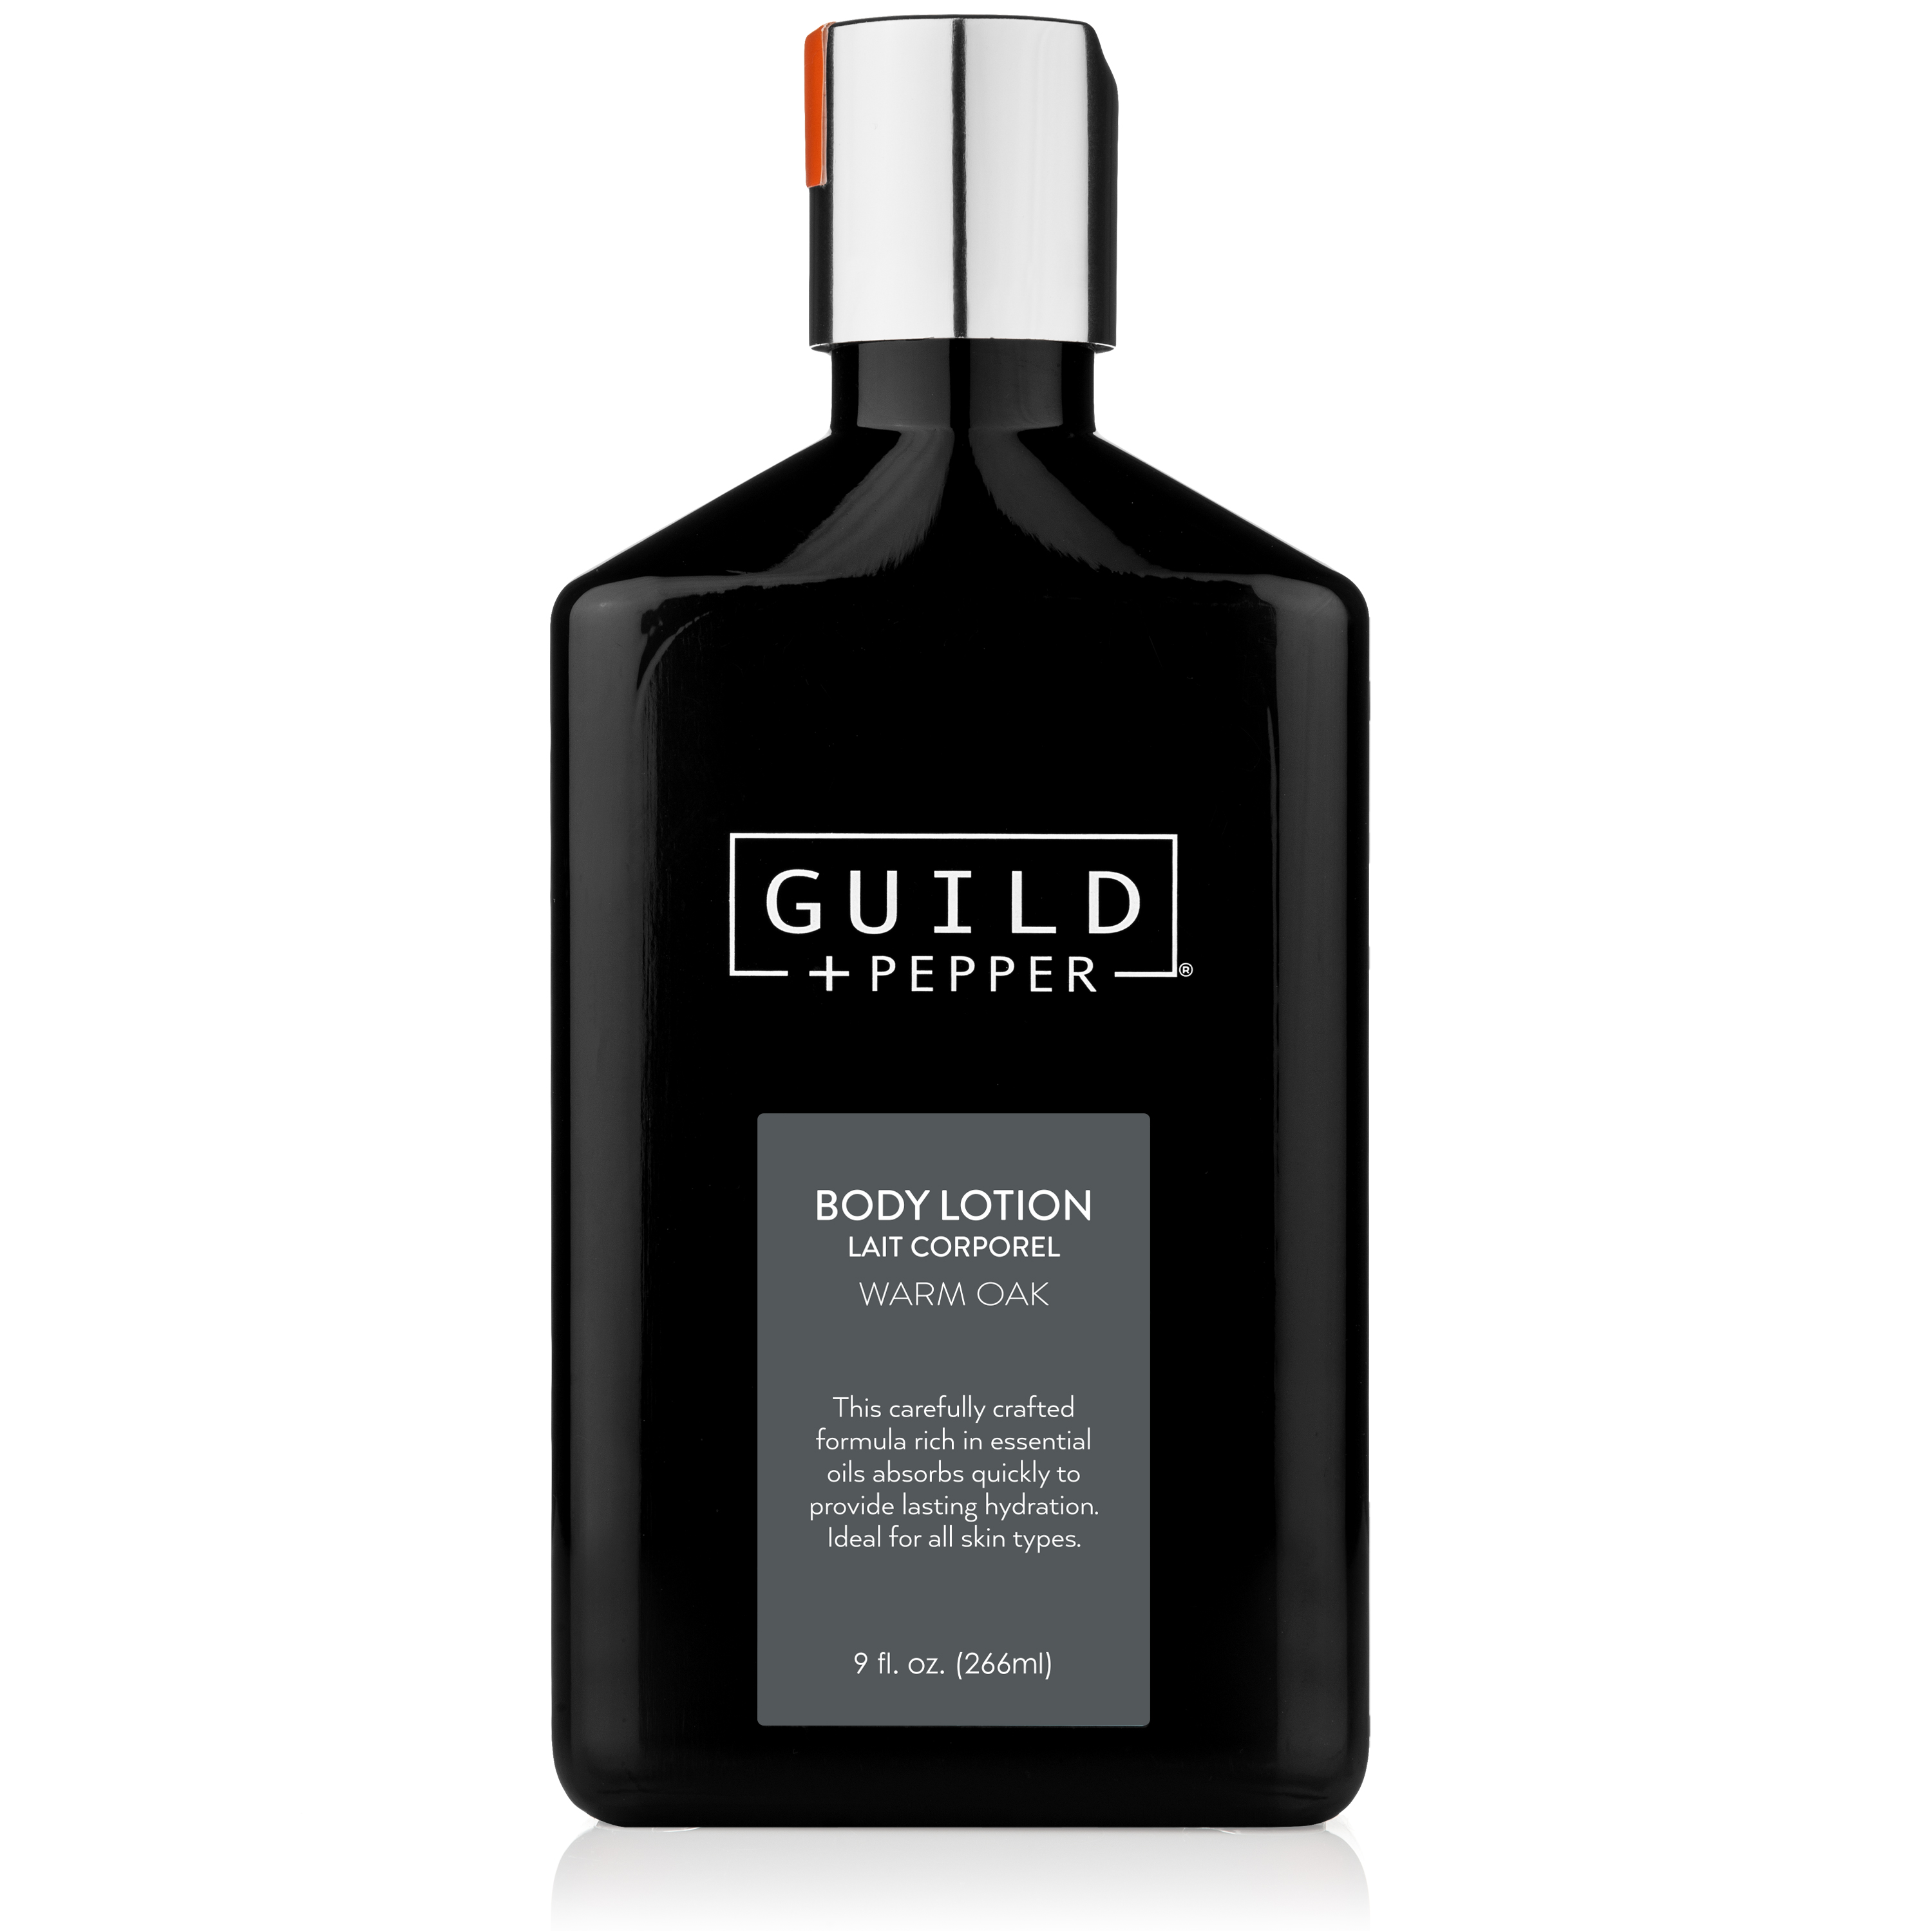 Guild+Pepper Body Lotion | Gilchrist & Soames